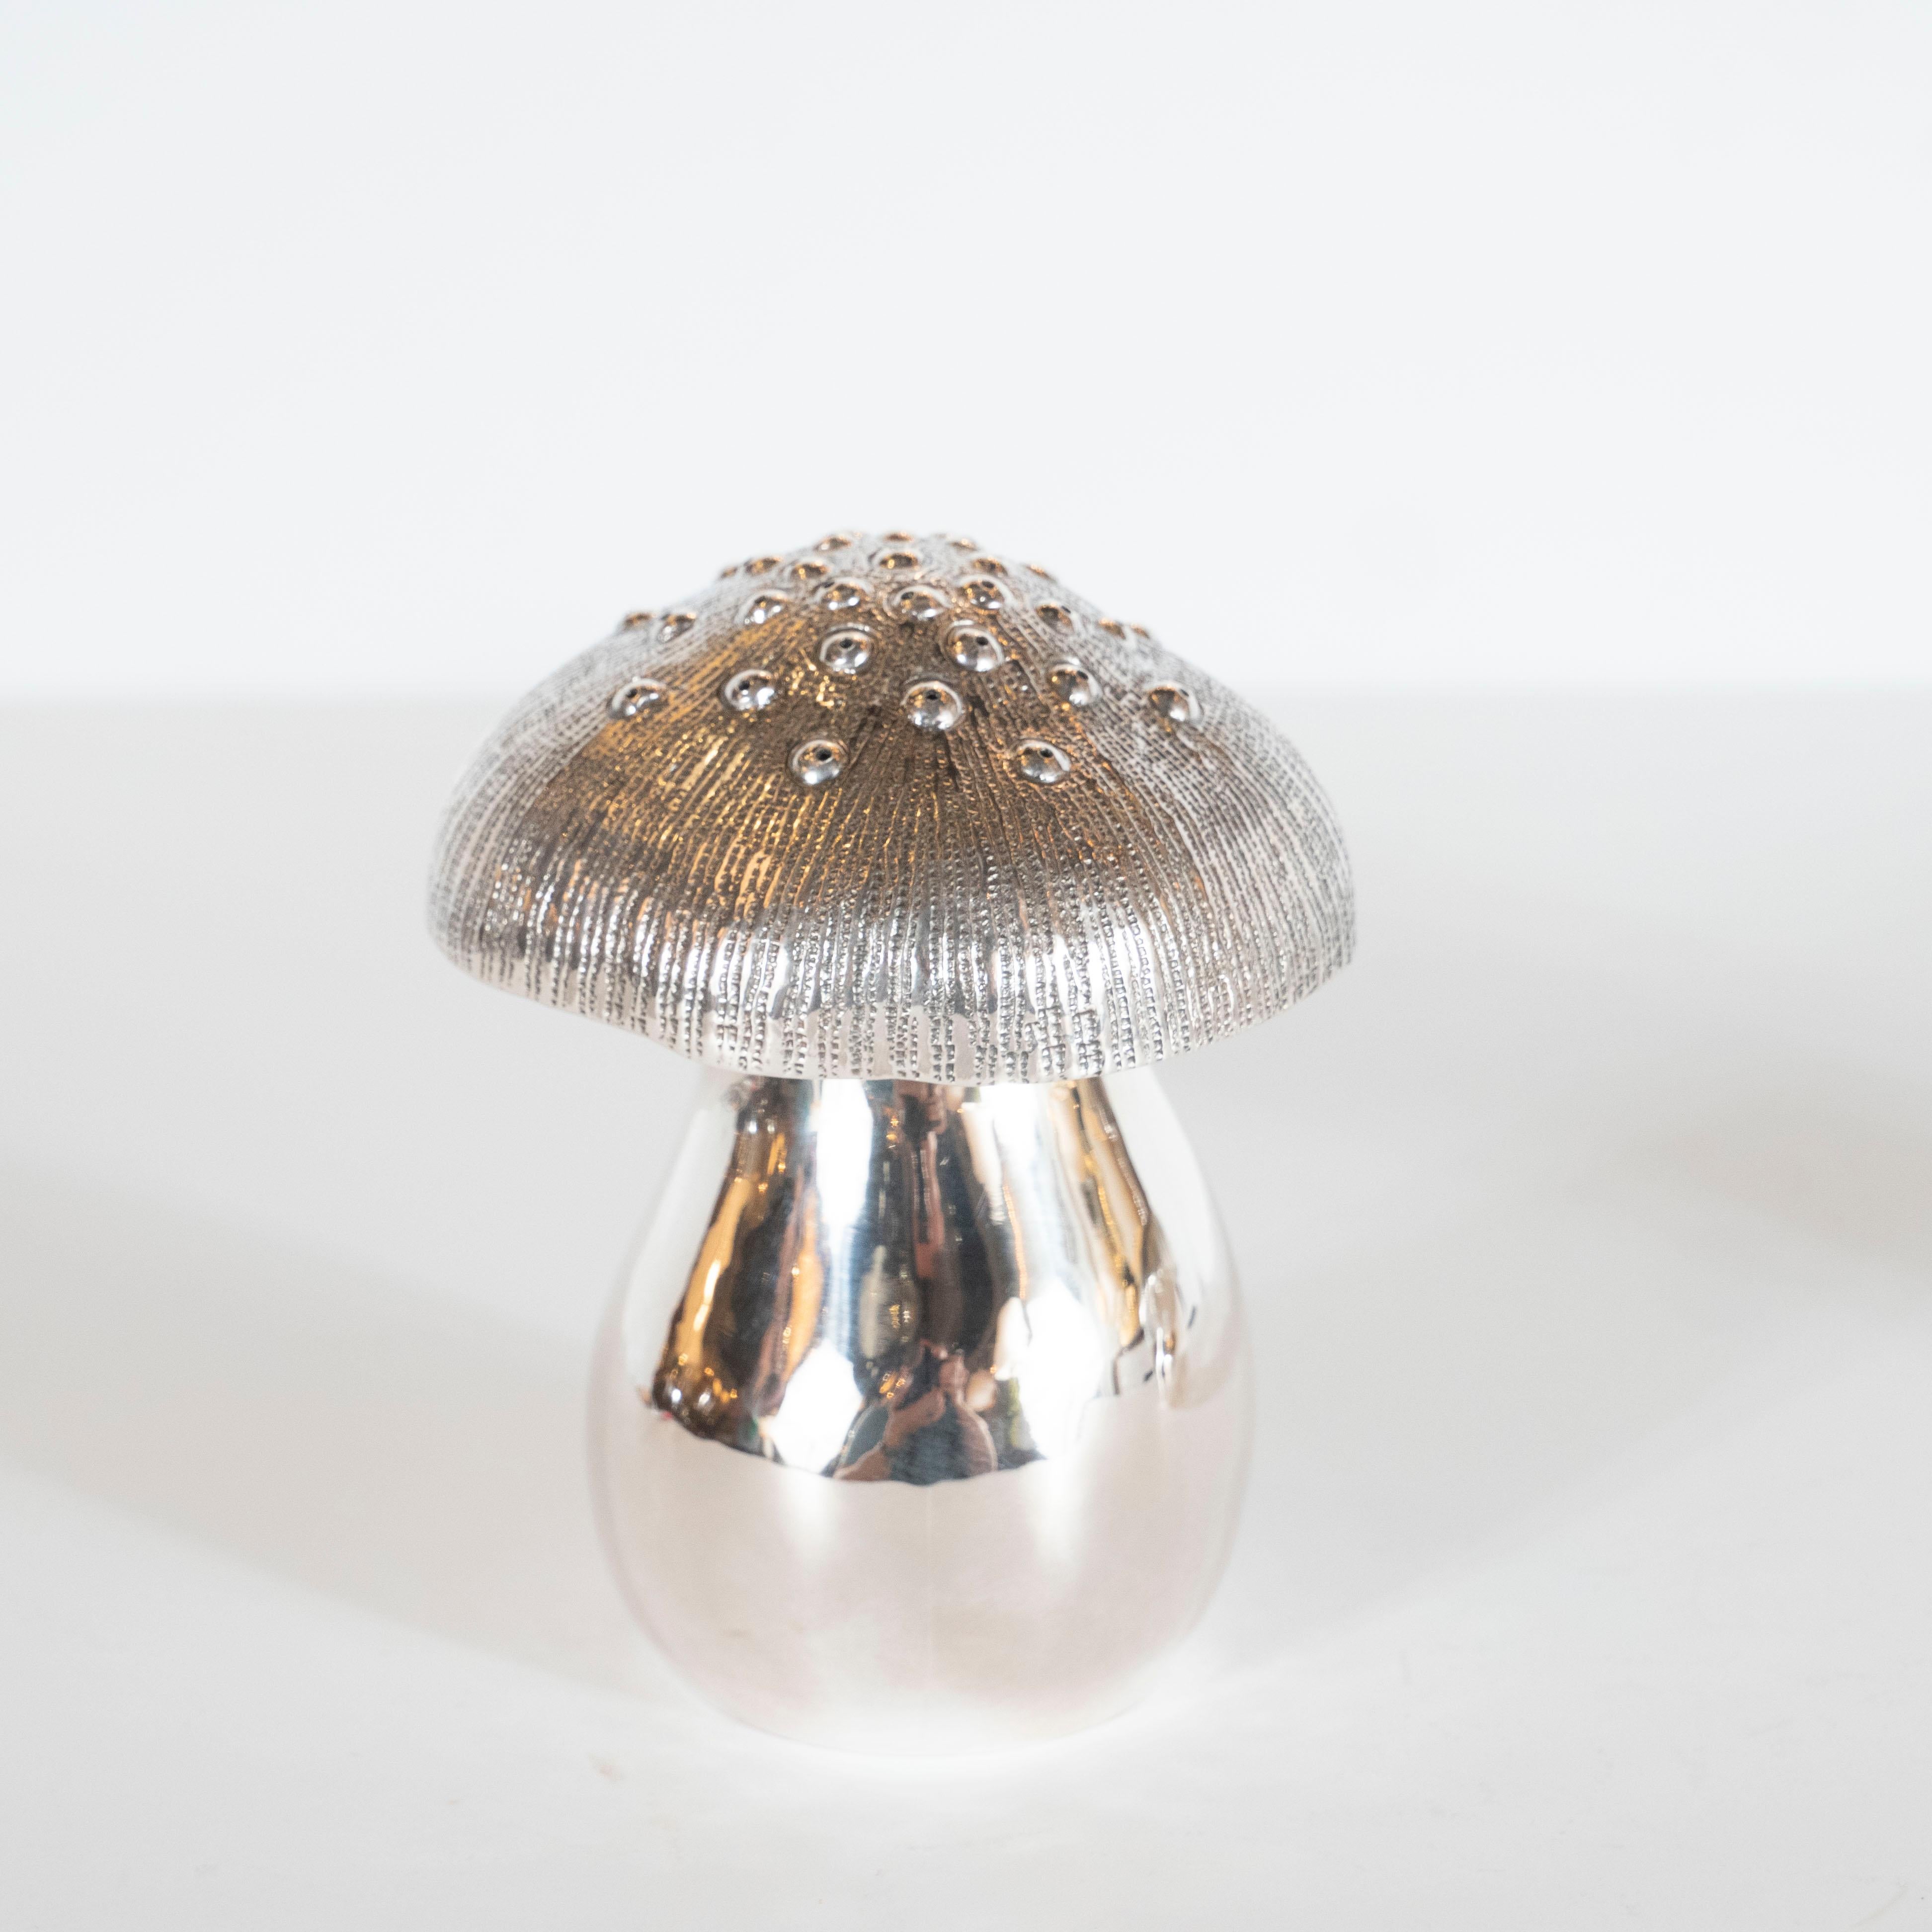 Established in Venice in 1846, Missiaglia is one of the world's premier makers of the finest jewelry objects, as well as a select number of bespoke sterling silver tabletop accessories. This handcrafted mushroom salt Shaker and pepper mill showcase